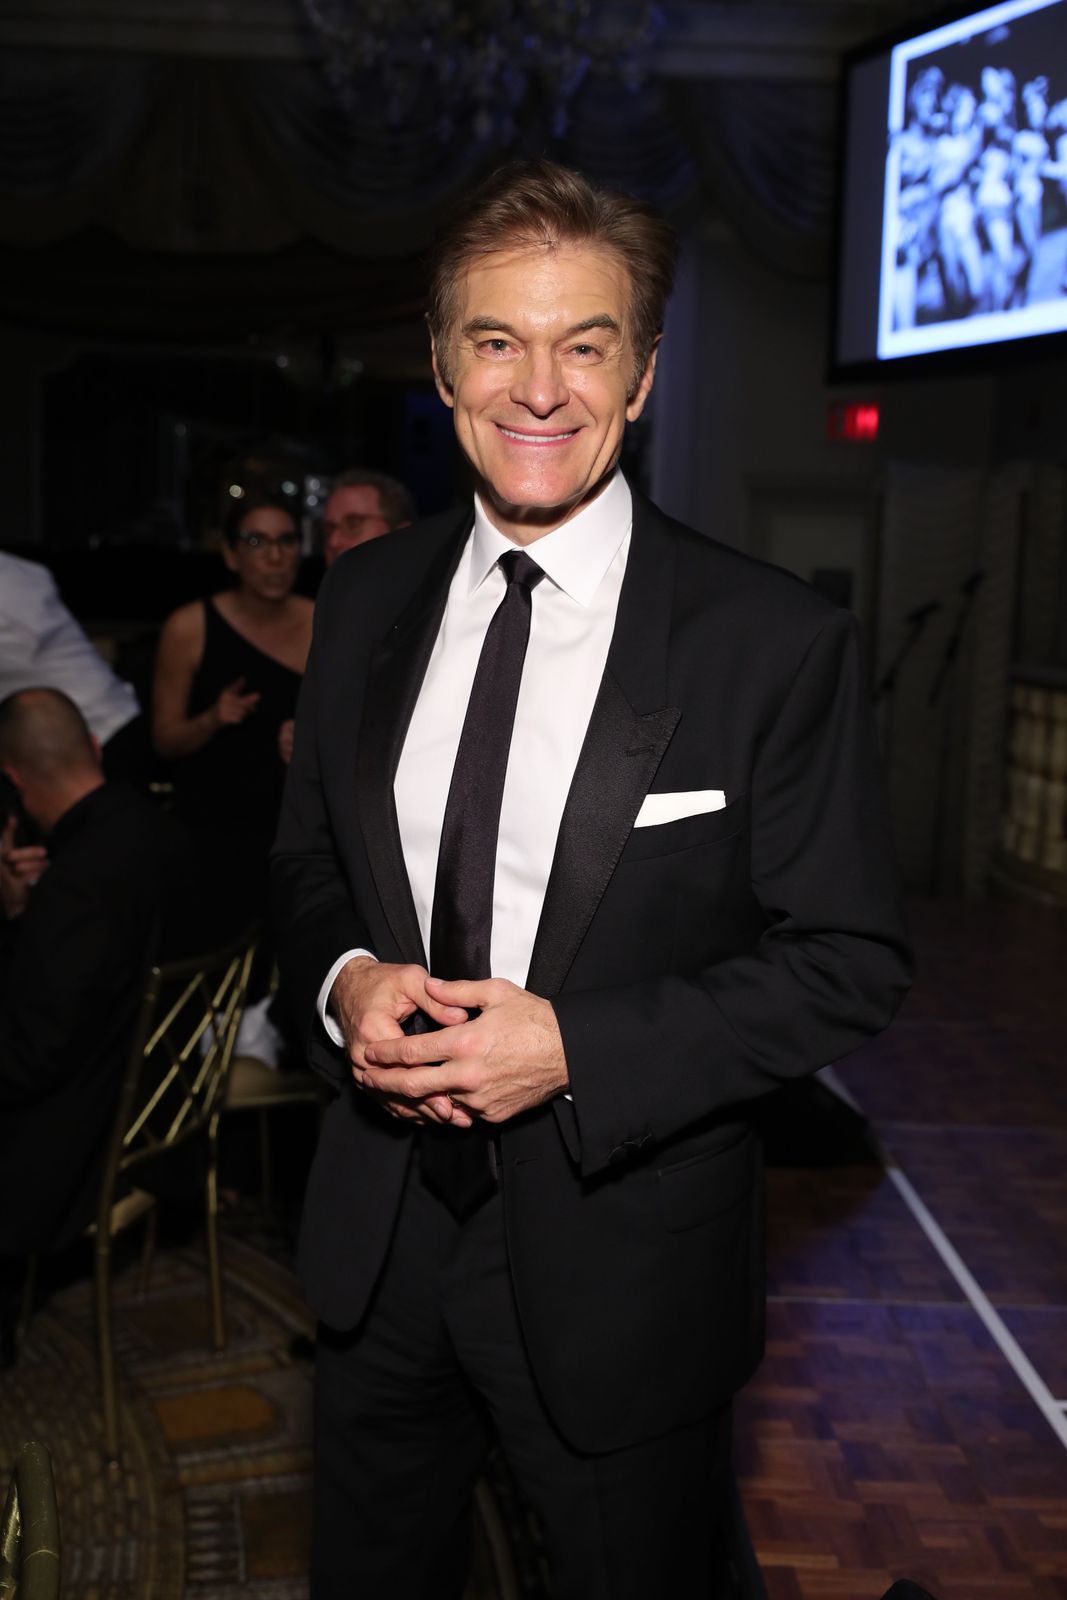 Mehmet Oz at the 7th Annual Order Of The Golden Sphinx Gala at The Pierre, A Taj Hotel on April 15, 2019 in New York City. | Photo: Getty Images